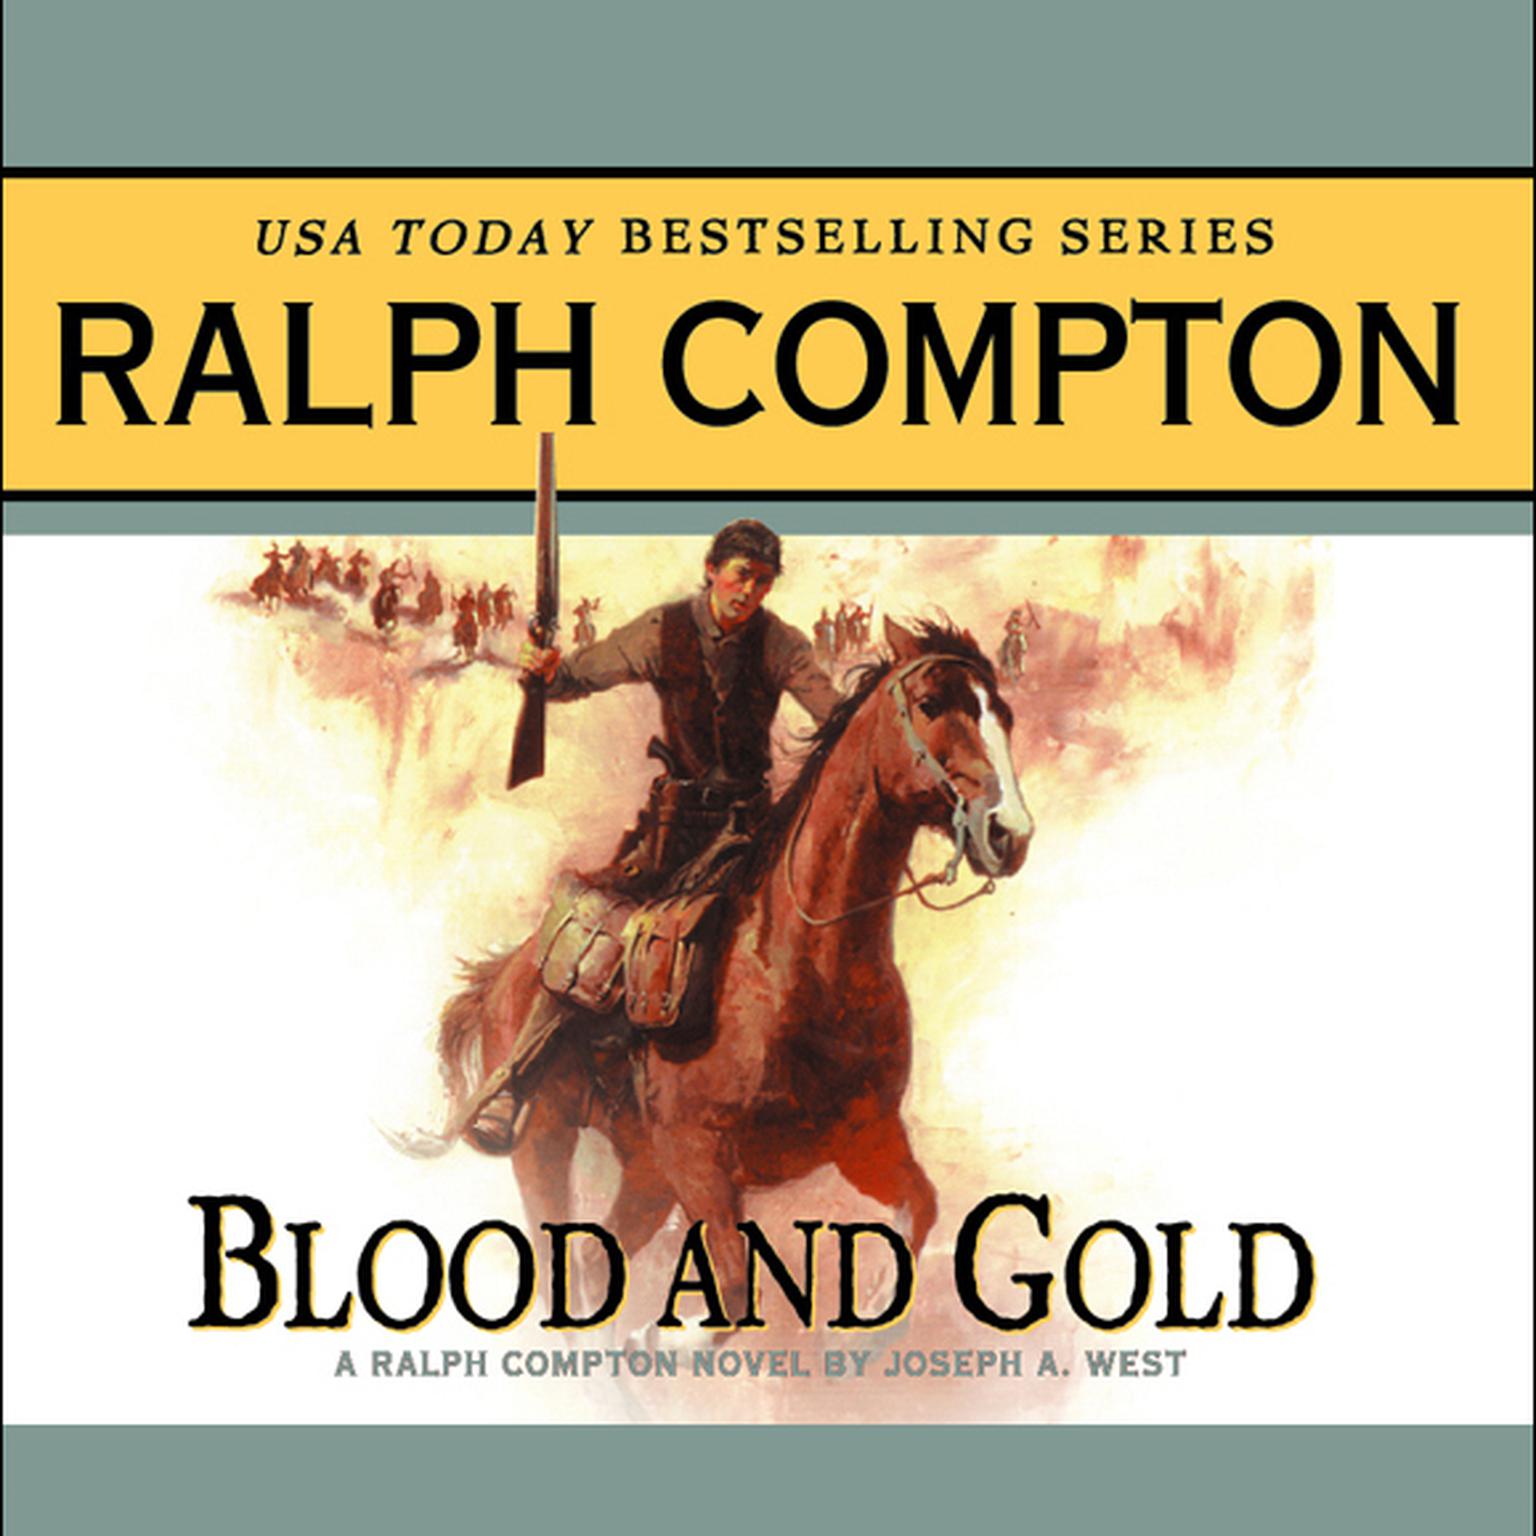 Blood and Gold (Abridged): A Ralph Compton Novel by Joseph A. West Audiobook, by Ralph Compton